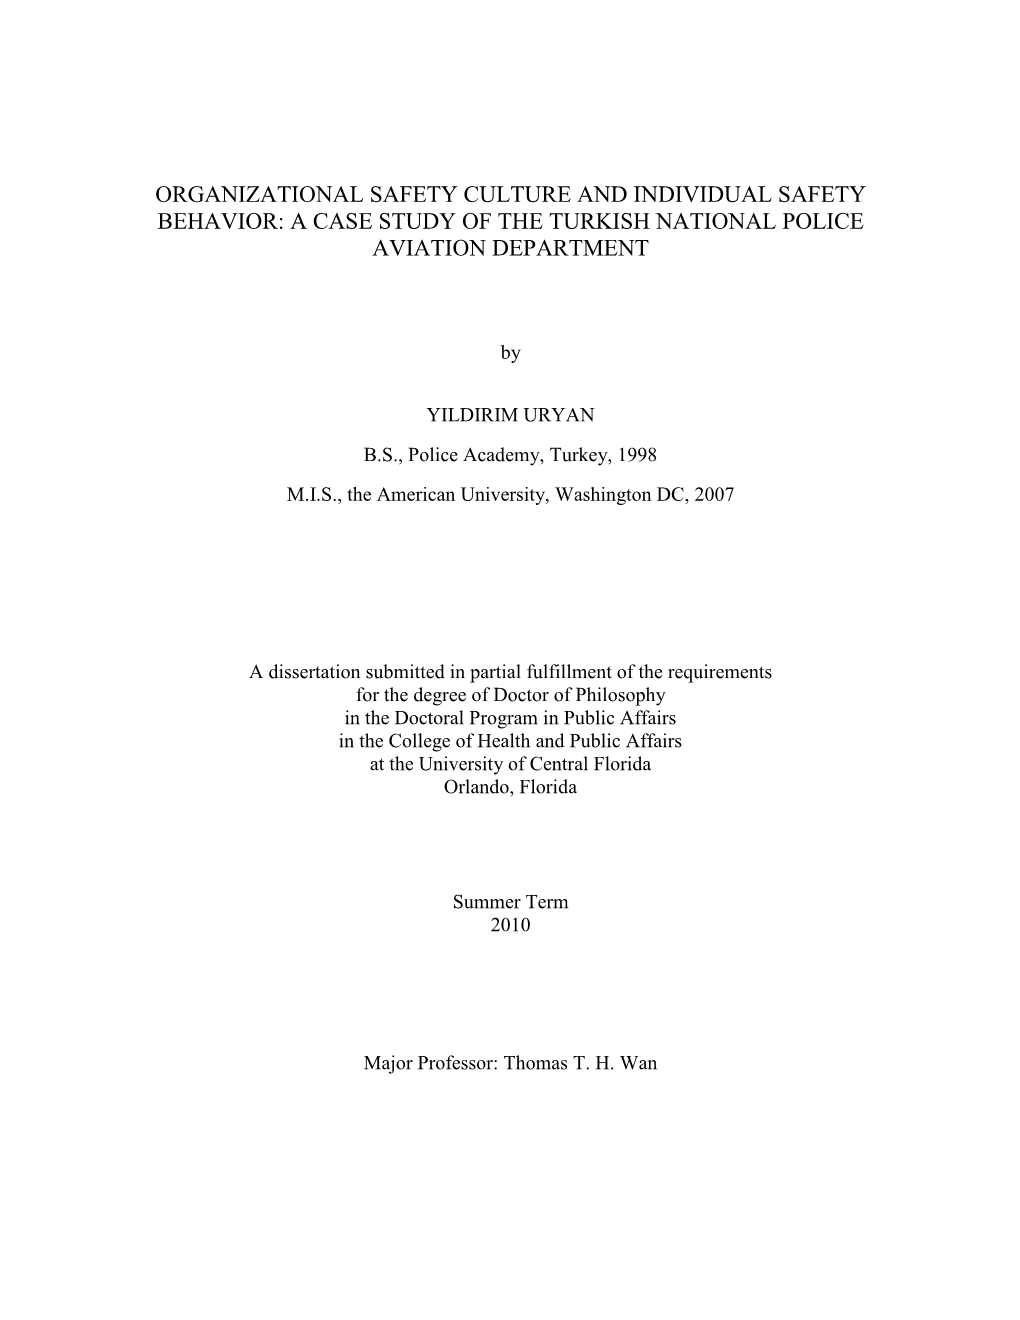 Organizational Safety Culture and Individual Safety Behavior: a Case Study of the Turkish National Police Aviation Department